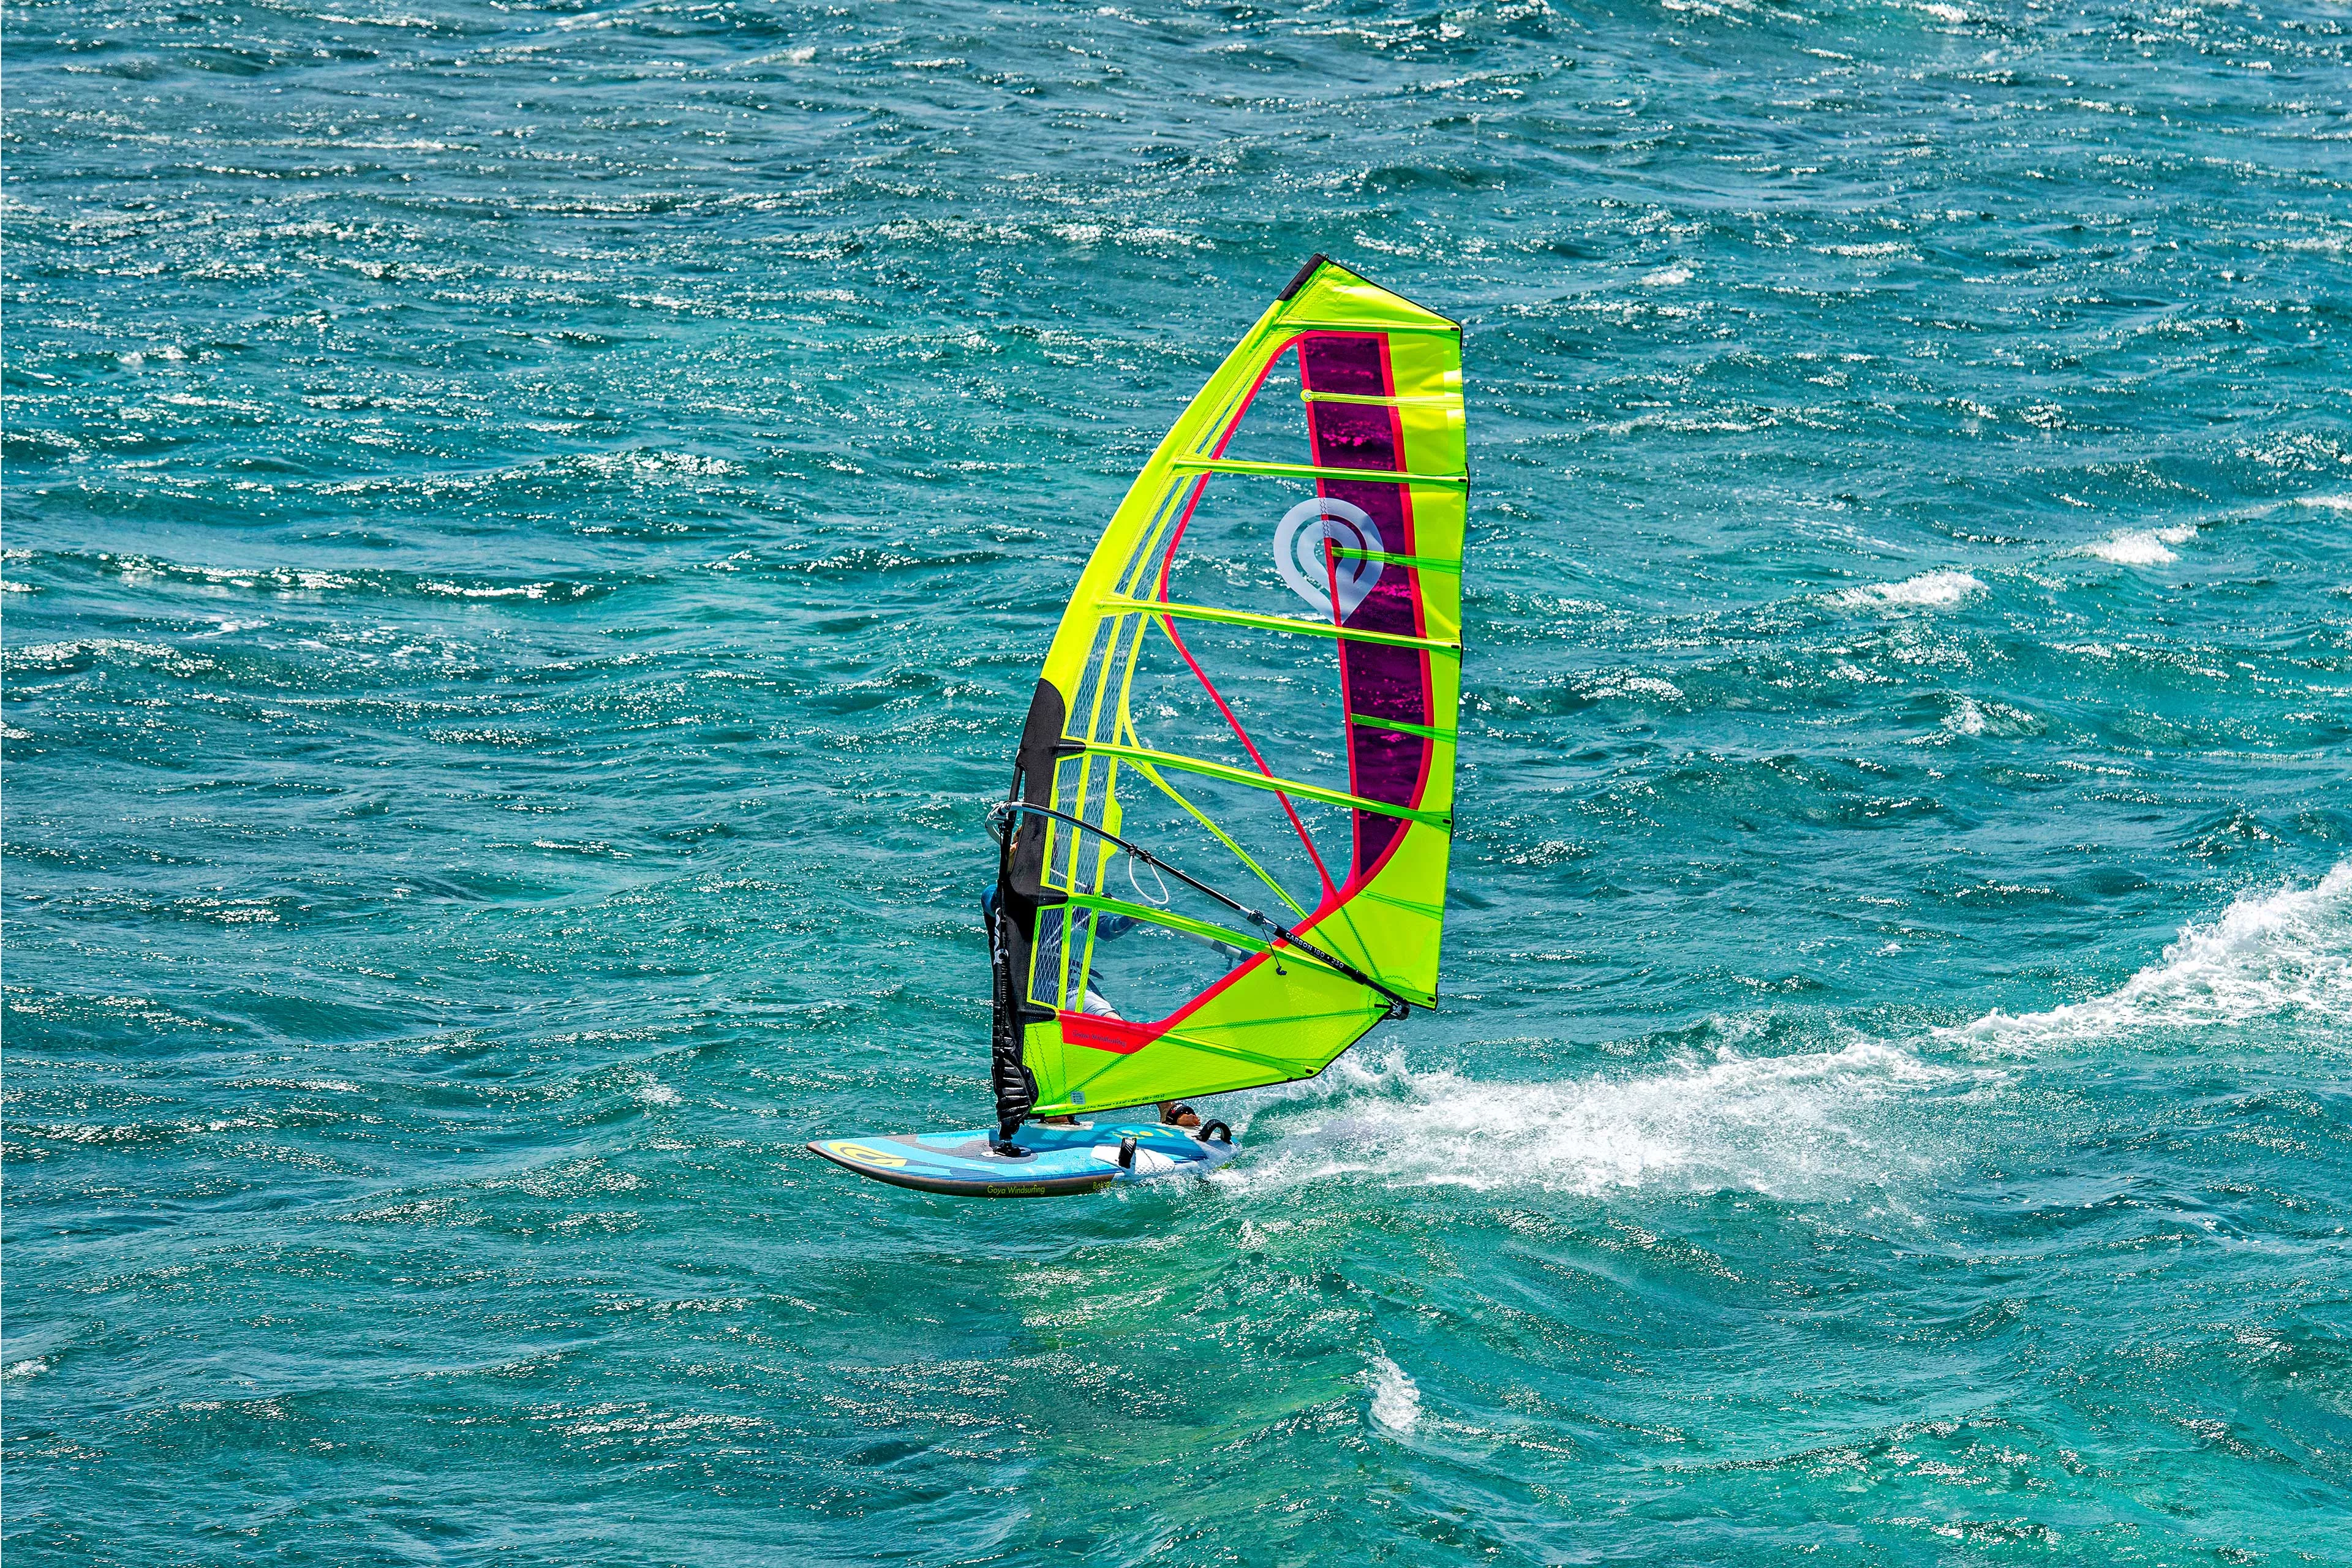 2nd Wind Sailboards in Australia, Australia and Oceania | Windsurfing - Rated 1